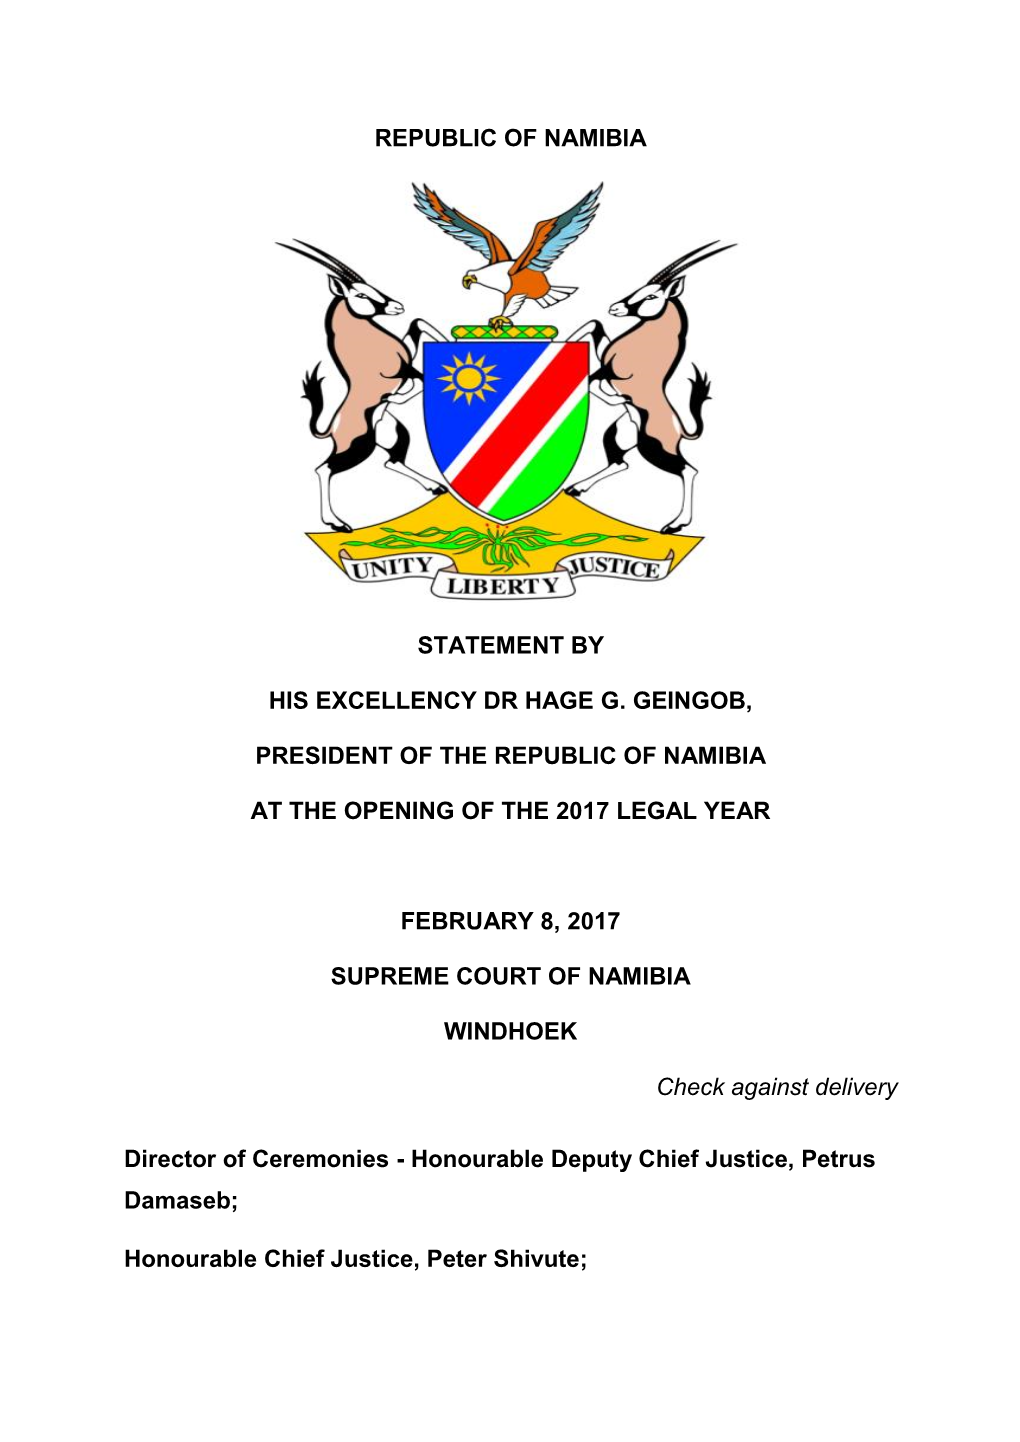 Republic of Namibia Statement by His Excellency Dr Hage